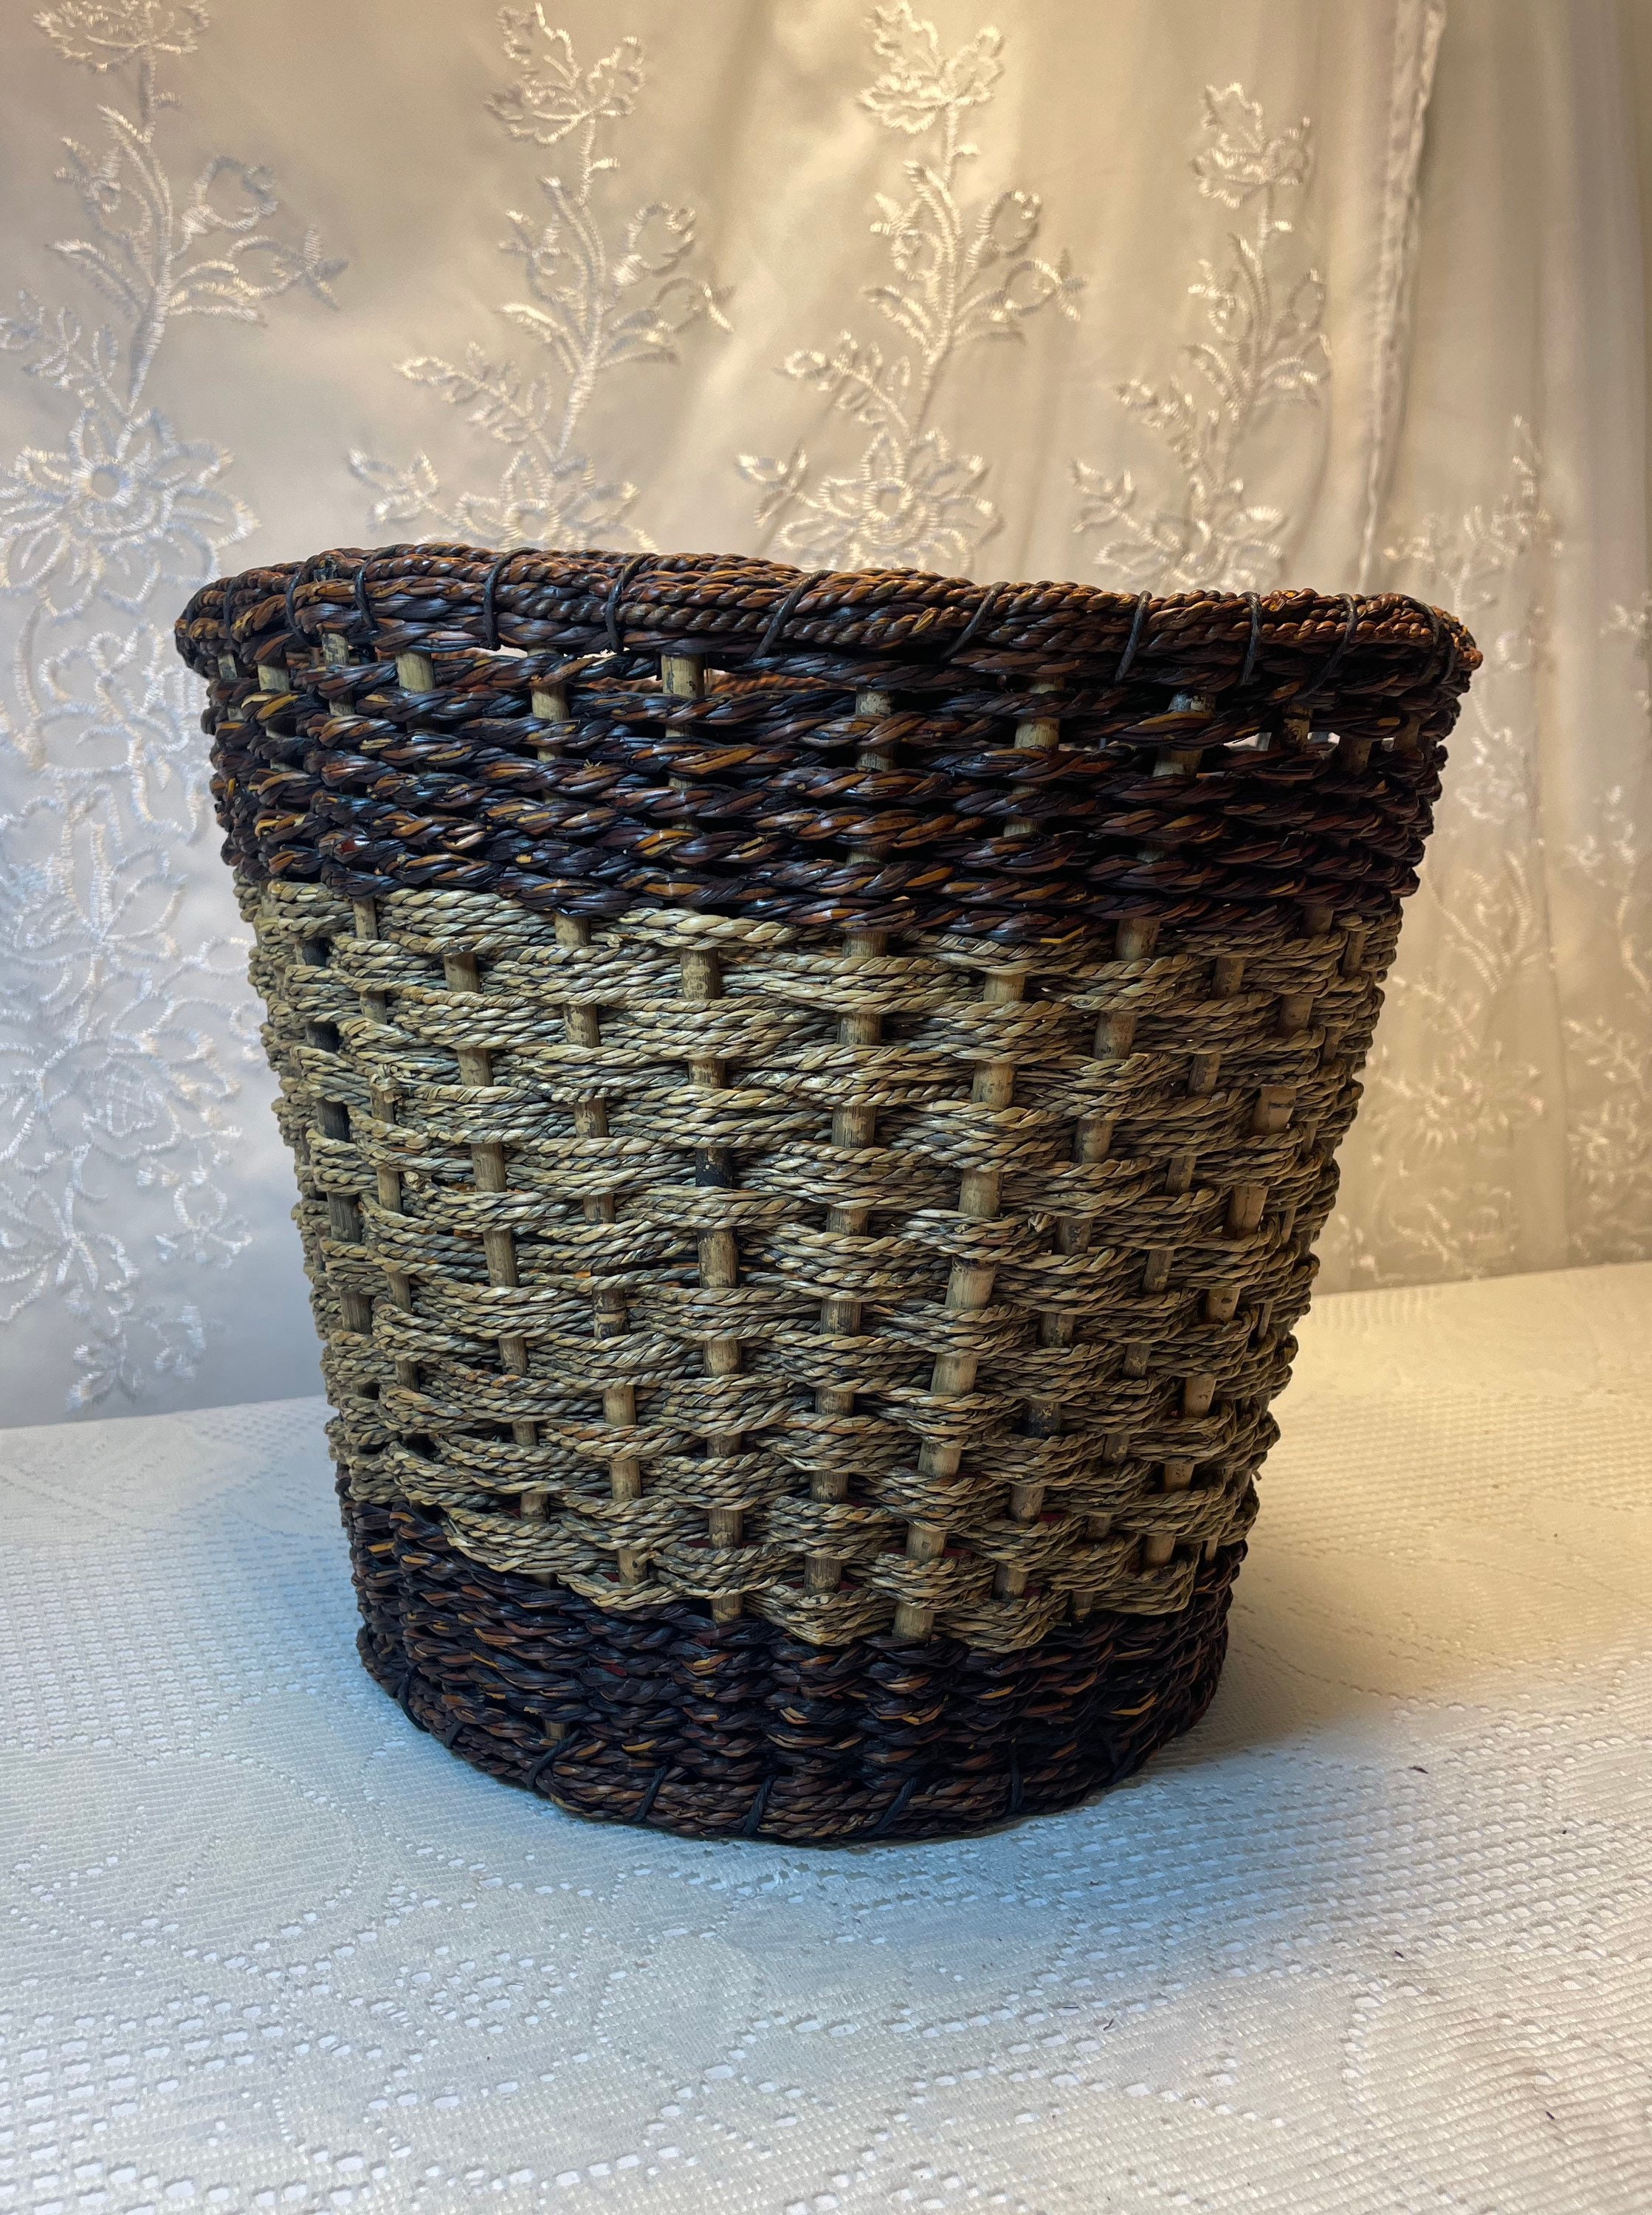 KOLWOVEN Wicker Trash Can with Lid in Bedroom, Bathroom - 3 Gallon Small  Trash Can in Office - Boho Woven Wicker Waste Basket - Office Garbage Cans  for Under Desk with Plastic Insert